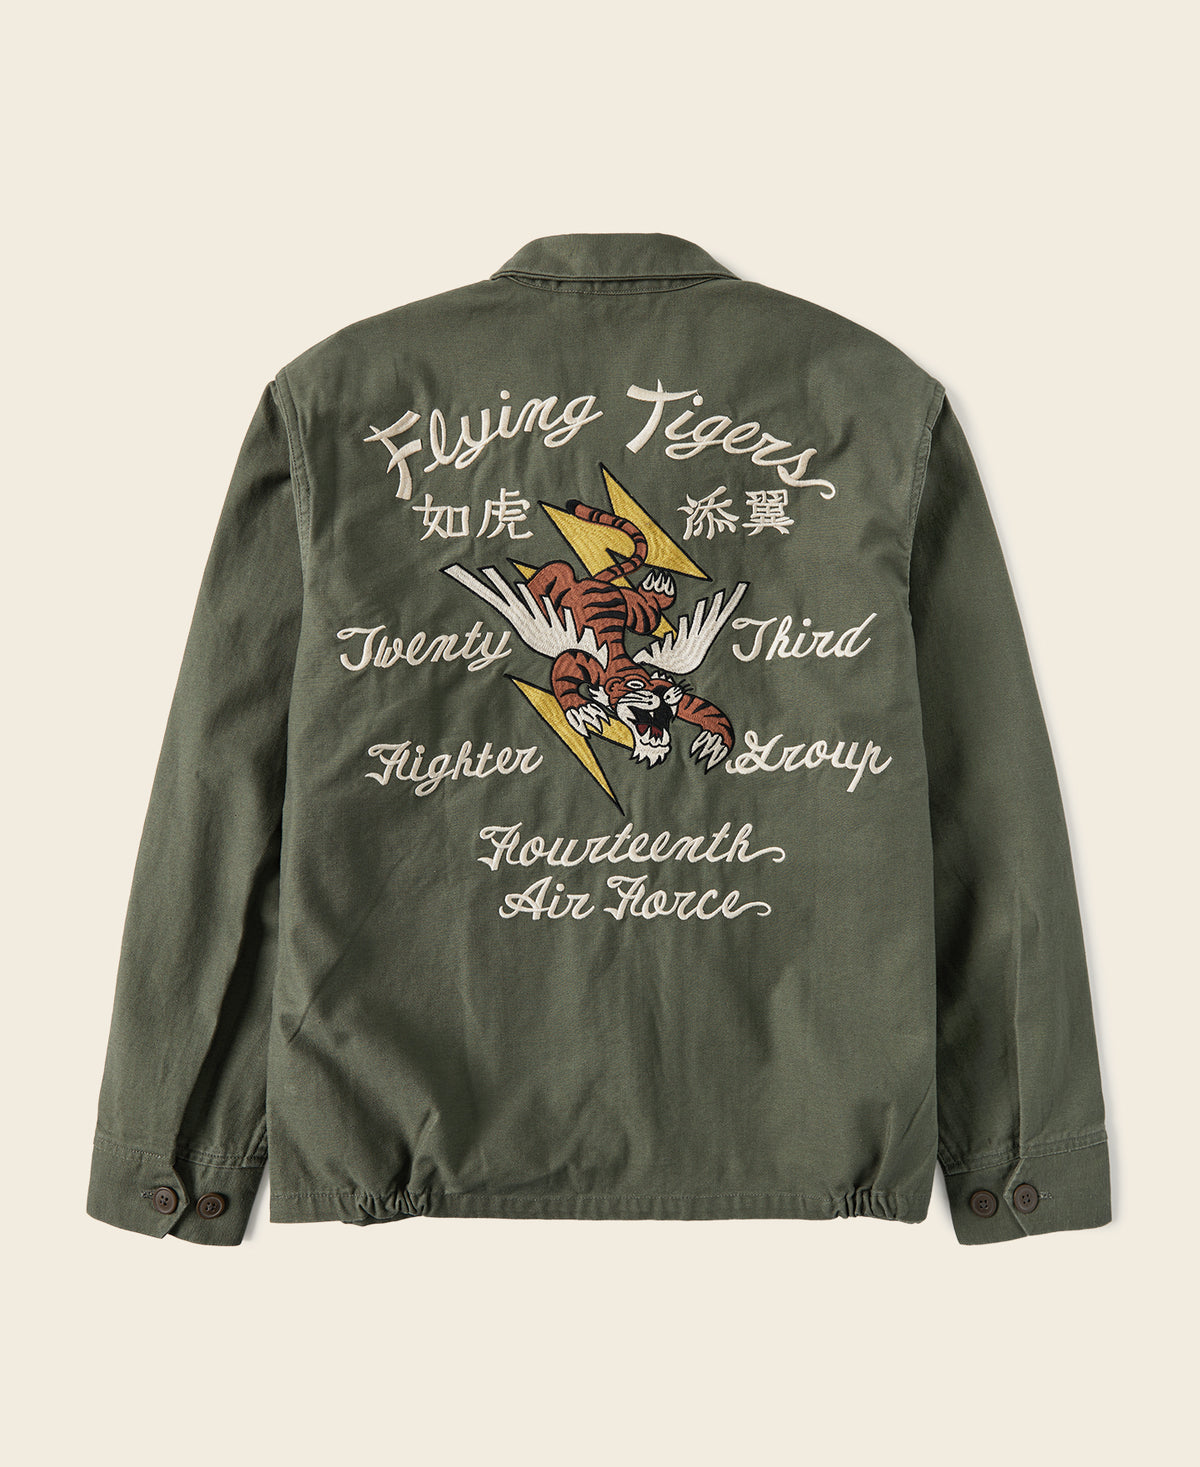 USAAF 14th Air Force Flying Tigers Embroidery Jacket